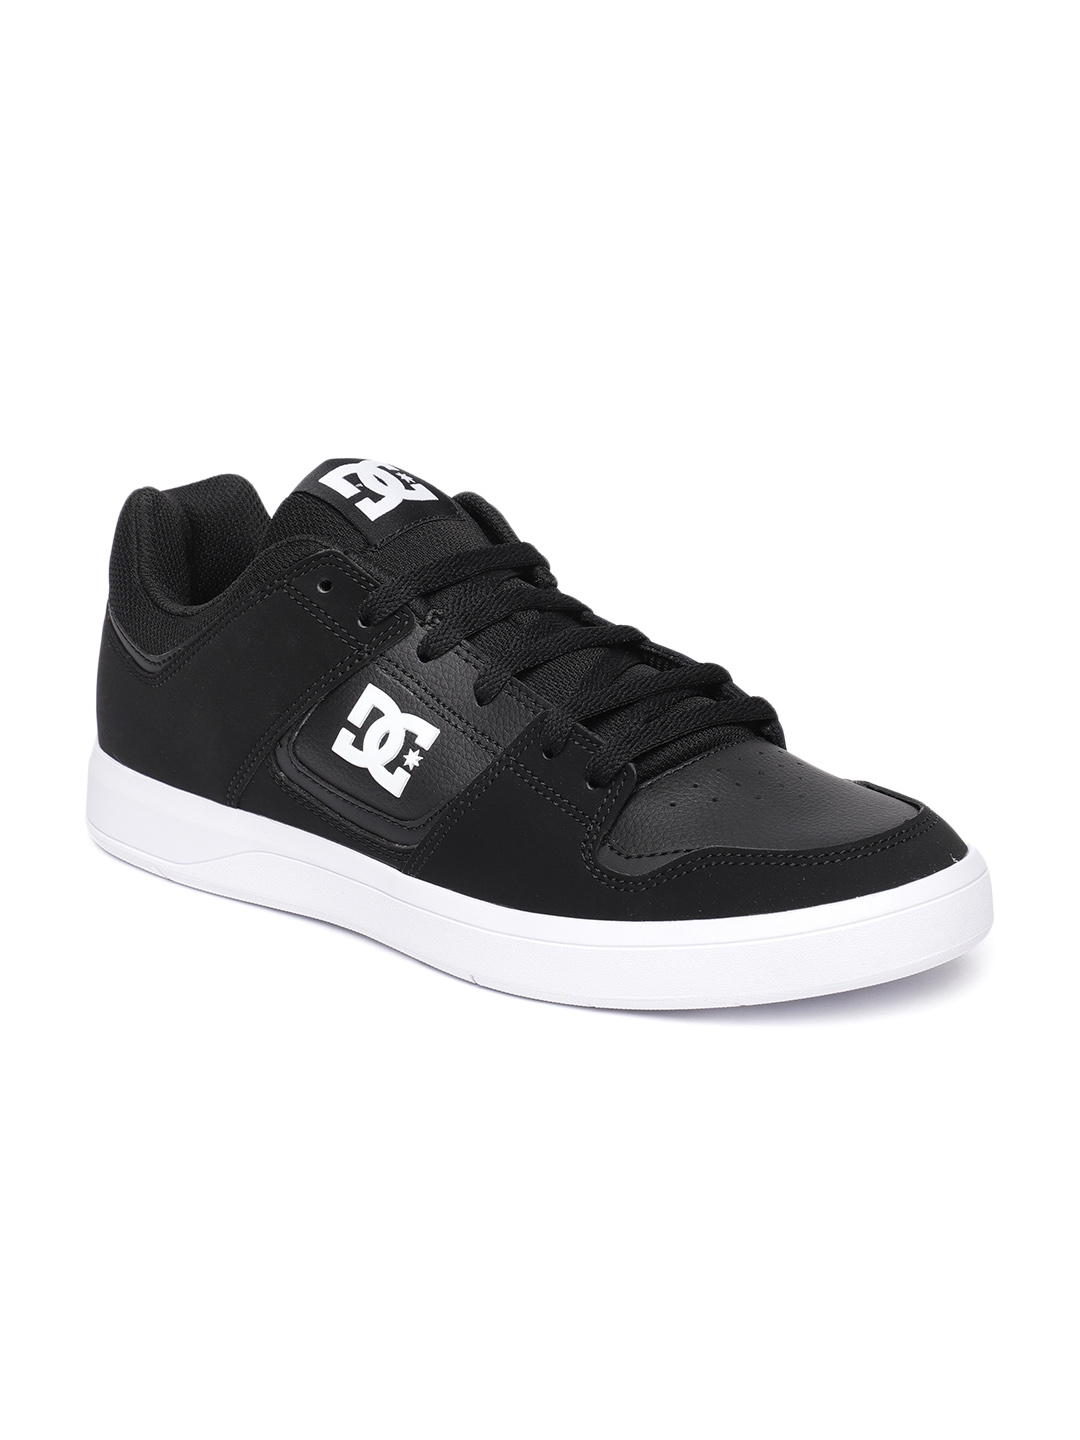 Top more than 160 dc casual shoes latest - kenmei.edu.vn